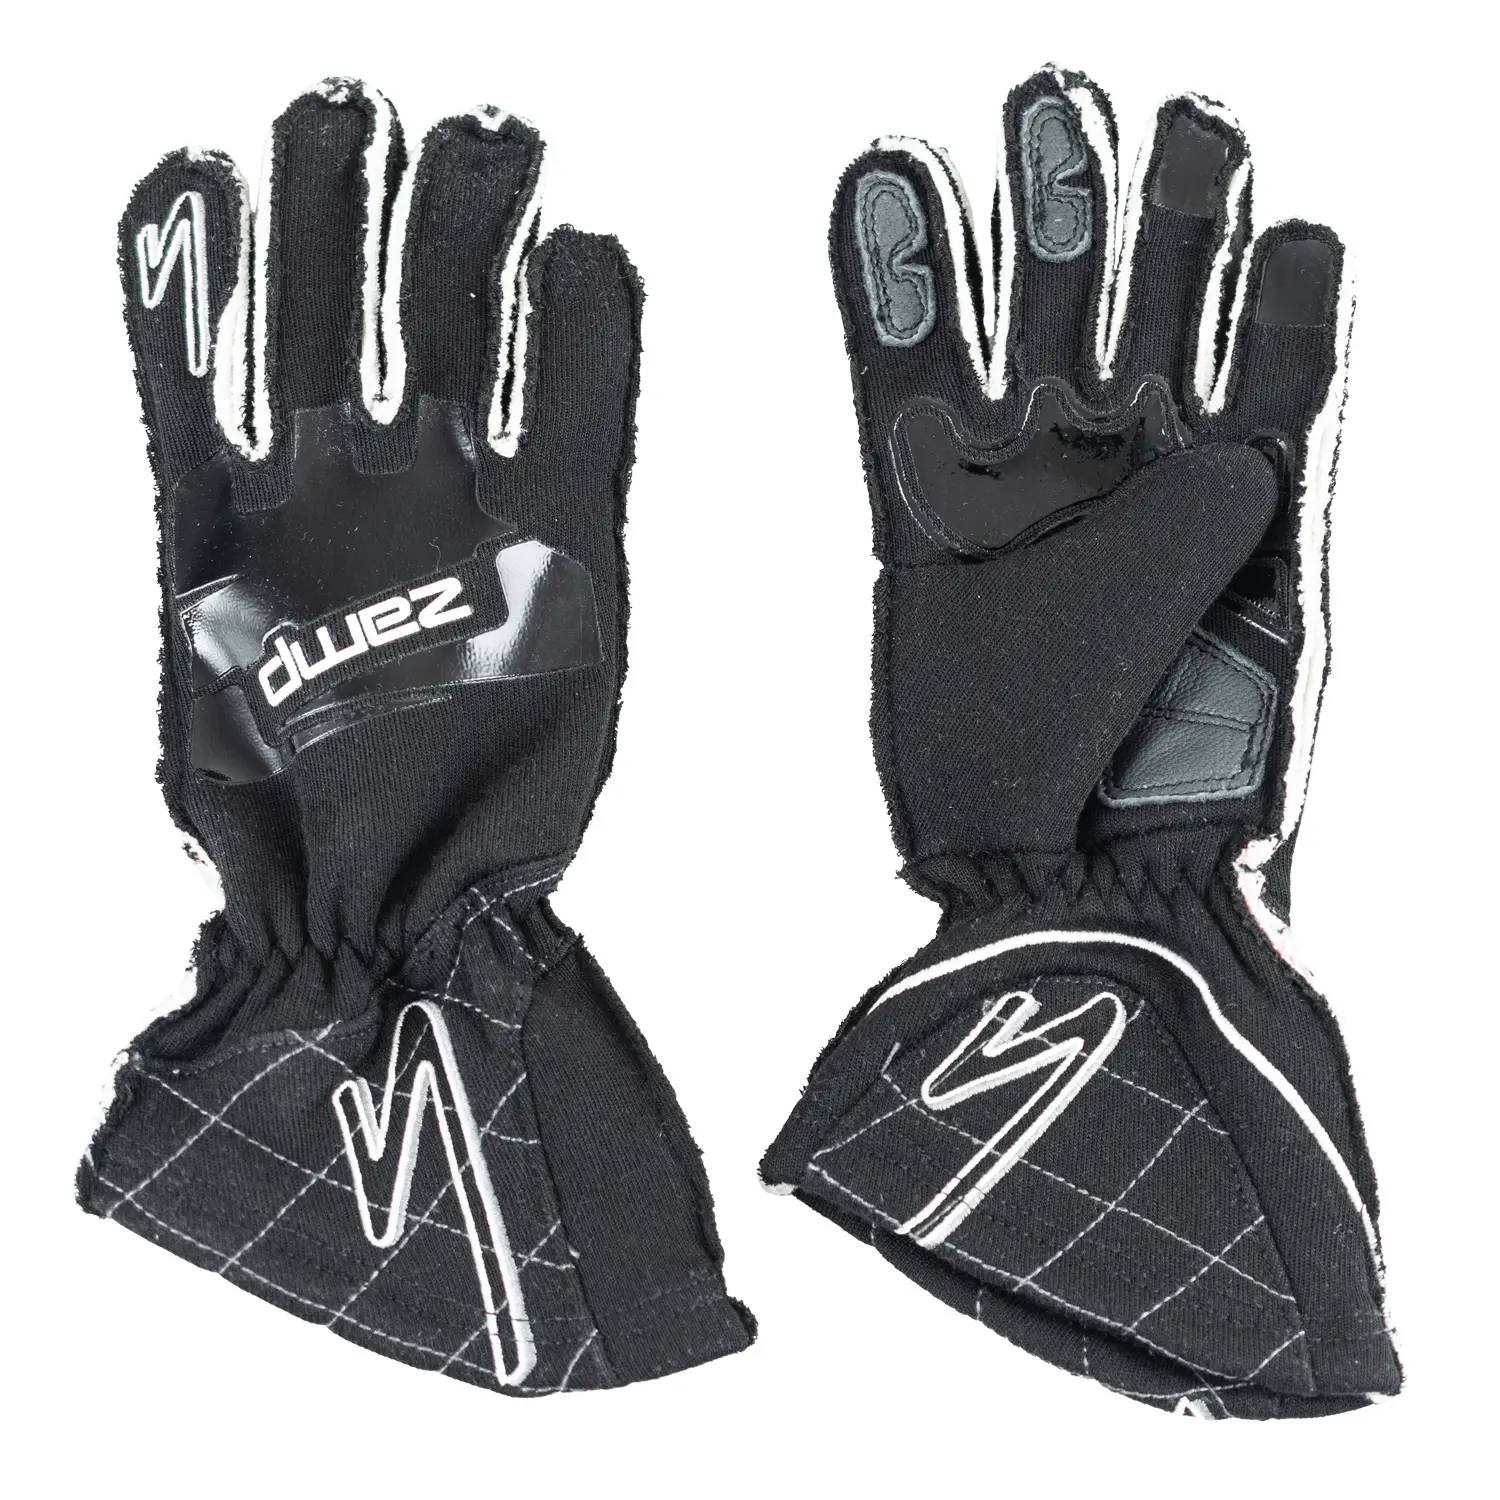 ZR-50 Youth Racing Gloves